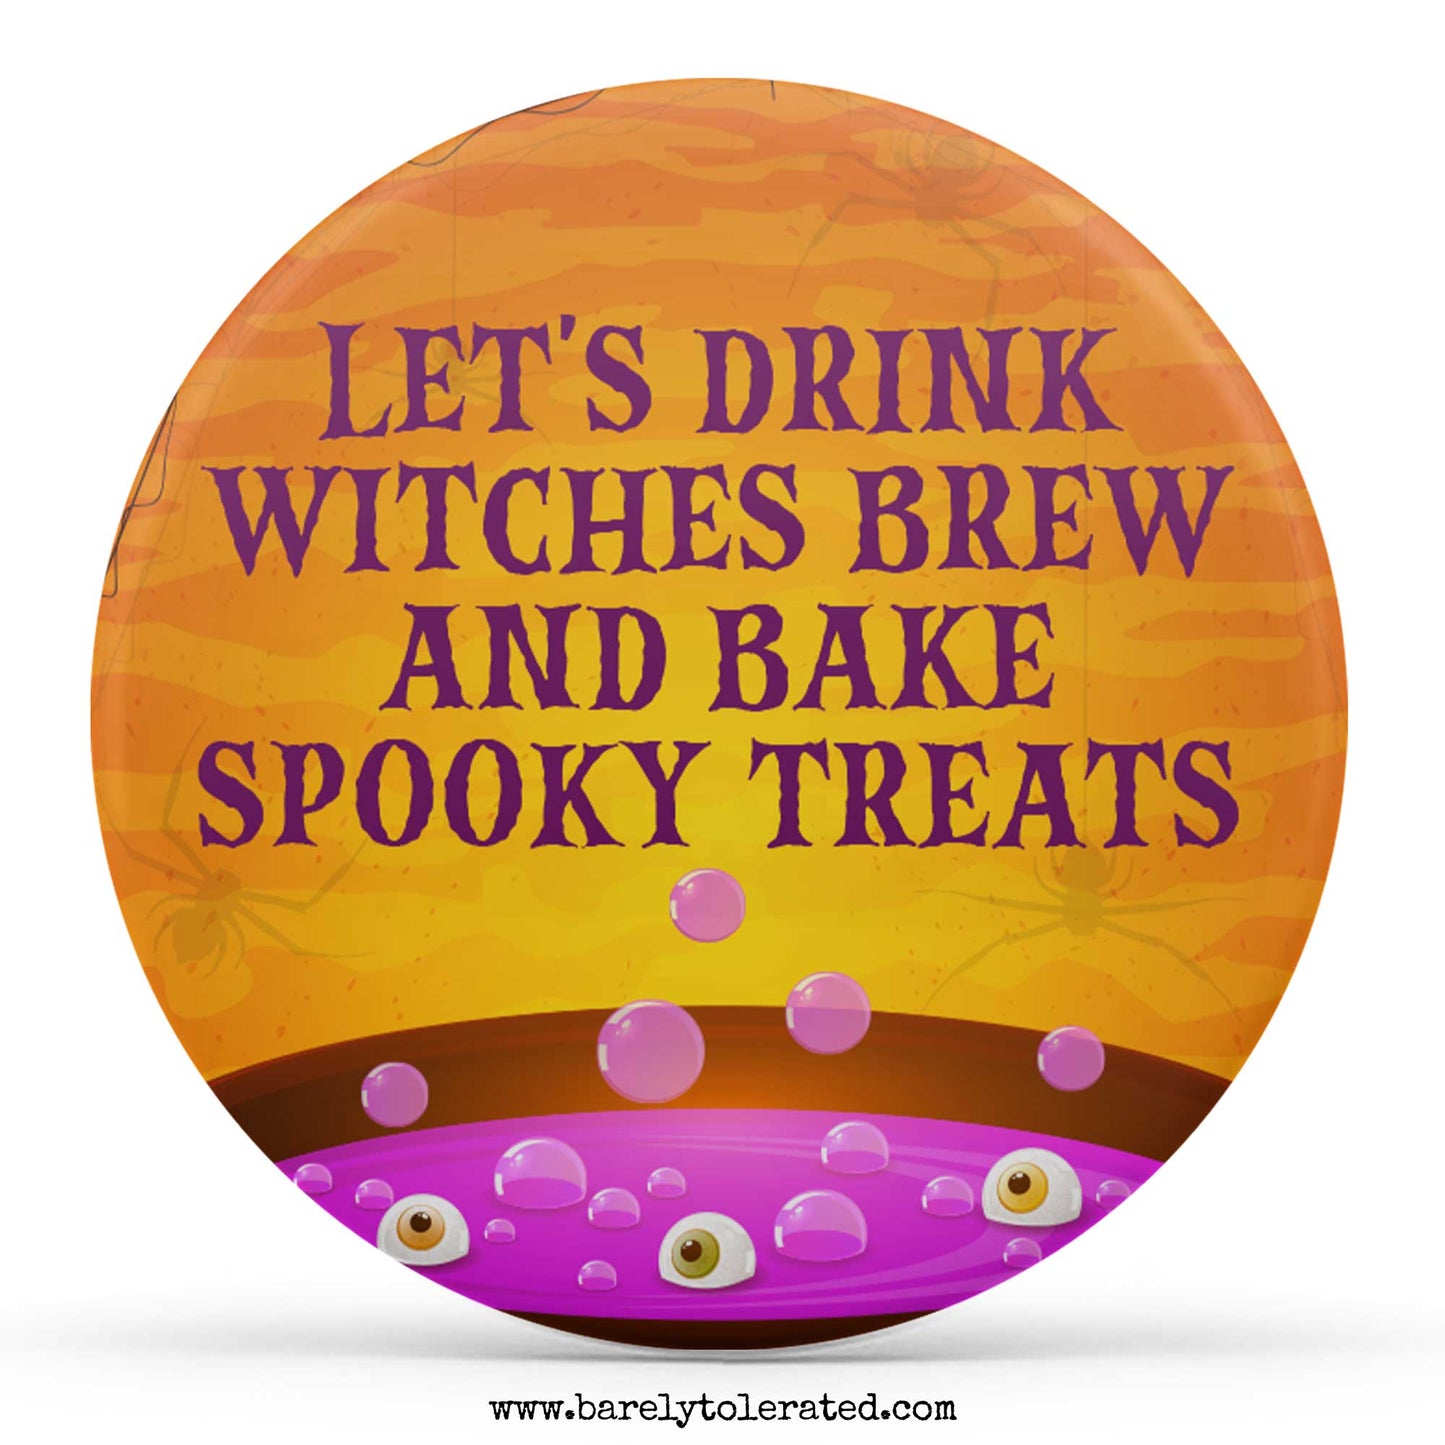 Let's Drink Witches Brew And Bake Spooky Treats